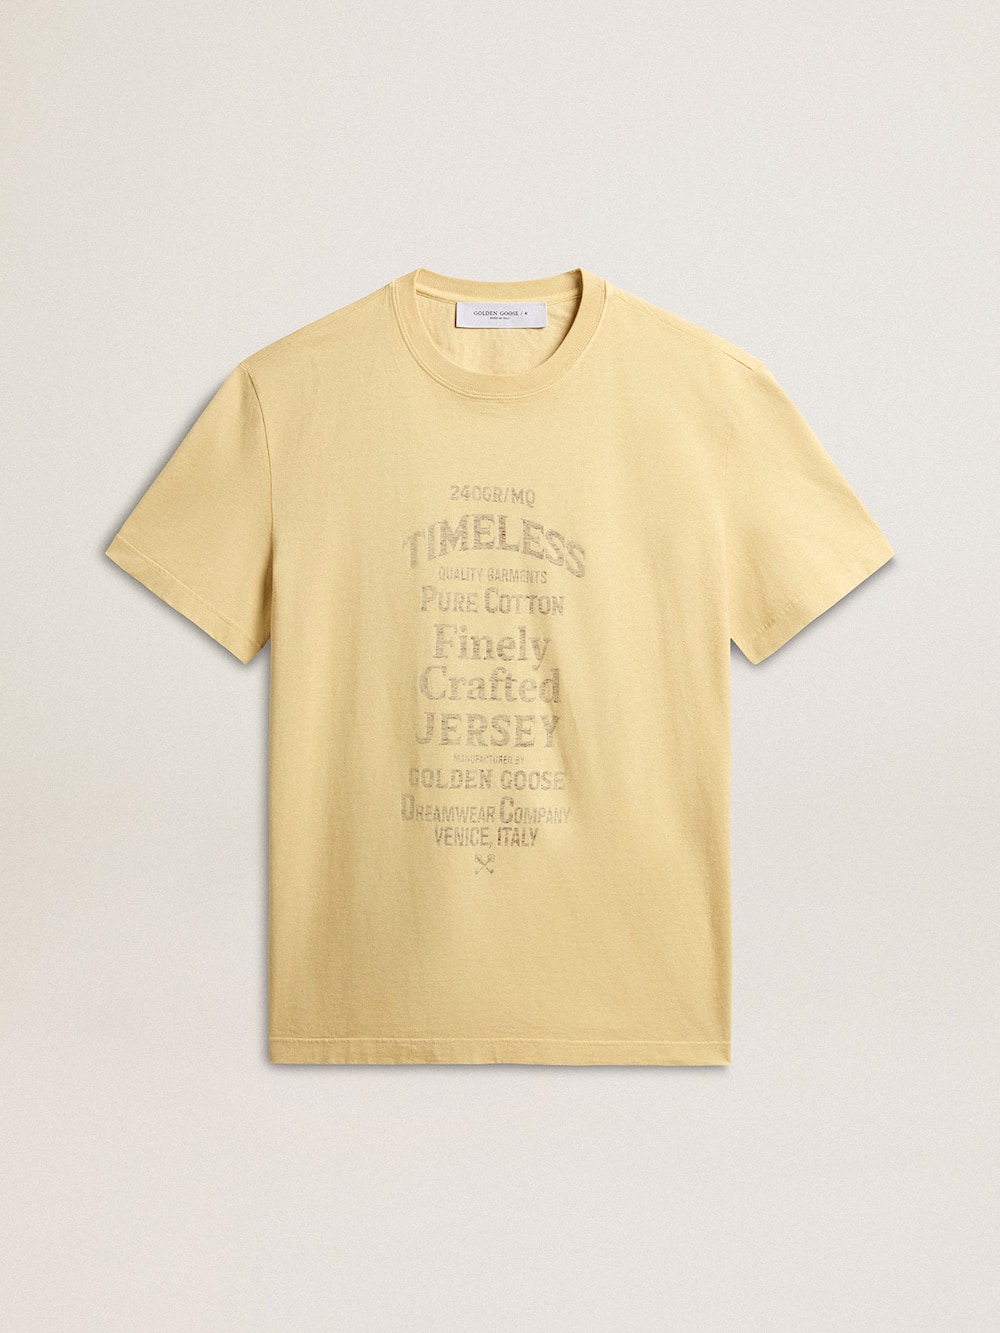 Golden Goose - Men's cotton T-shirt in pale yellow with faded lettering in 